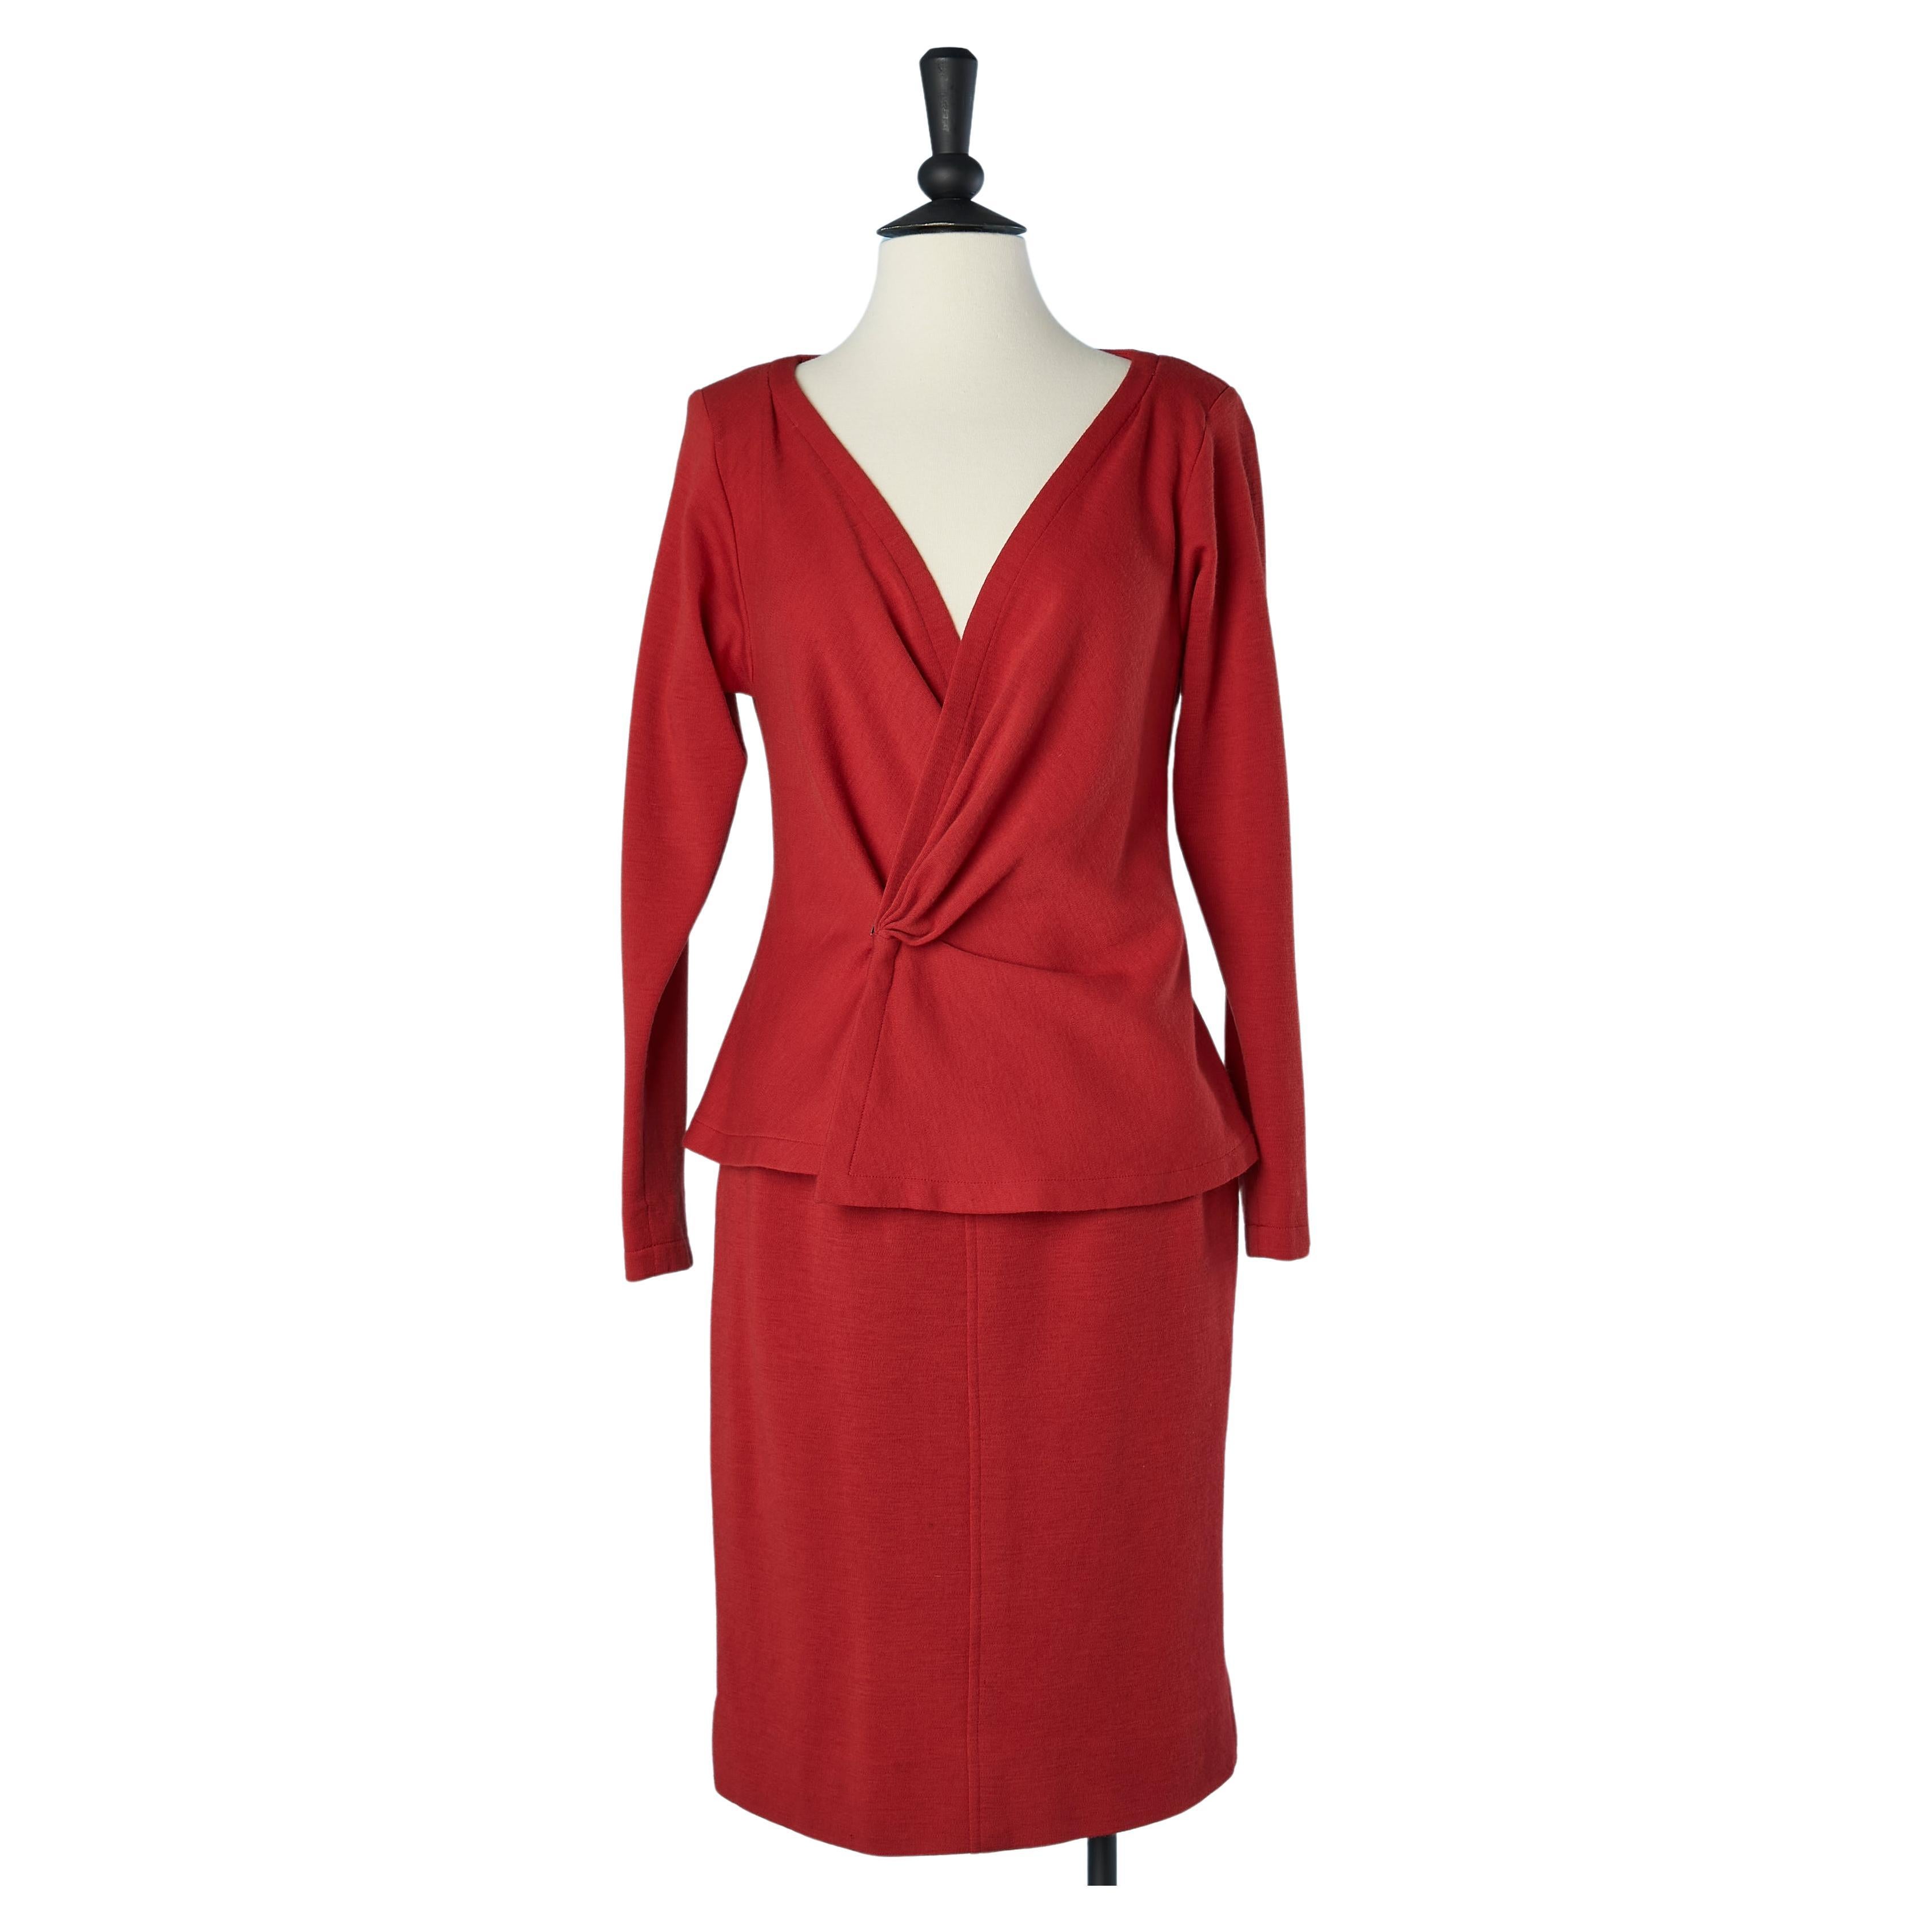 Wrap  and drape top in red wool jersey and skirt Saint Laurent Rive Gauche 